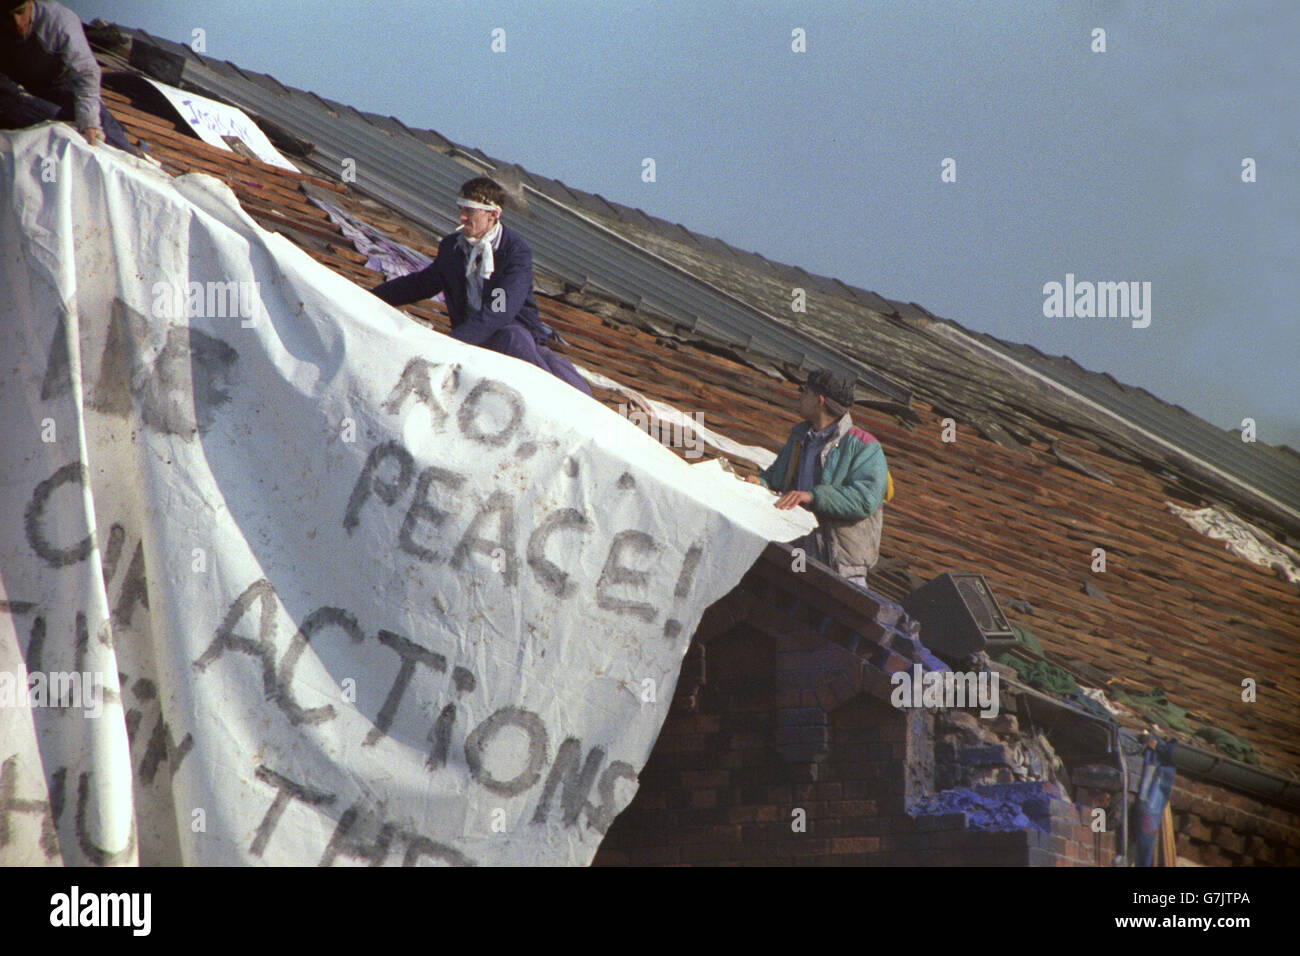 Prisoners continue their protest on the roof at Strangeways prison in Manchester. Stock Photo